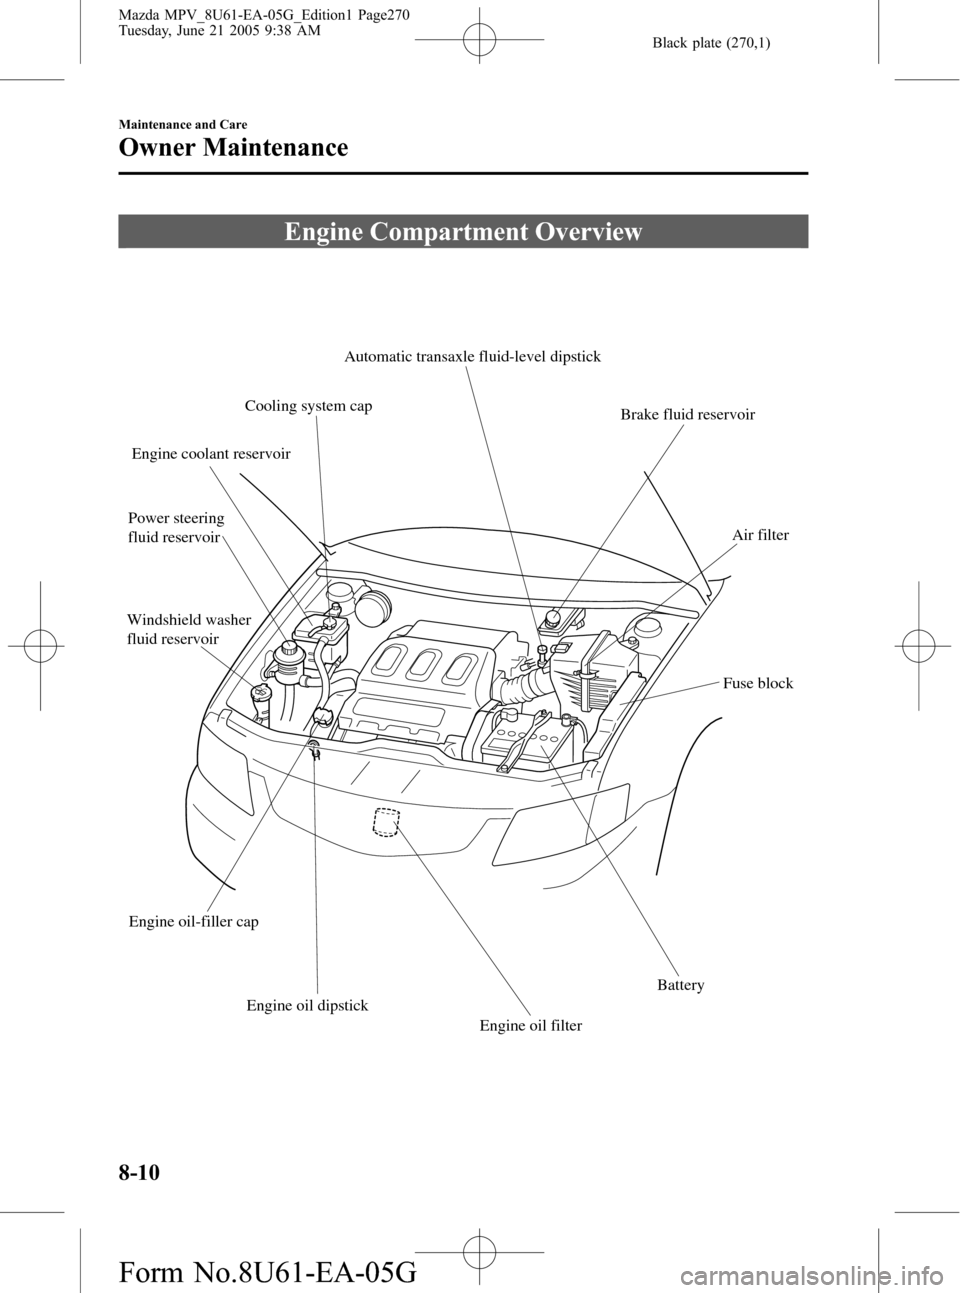 MAZDA MODEL MPV 2006  Owners Manual (in English) Black plate (270,1)
Engine Compartment Overview
Automatic transaxle fluid-level dipstick 
Cooling system cap
Engine coolant reservoir
Power steering 
fluid reservoir
Windshield washer 
fluid reservoir